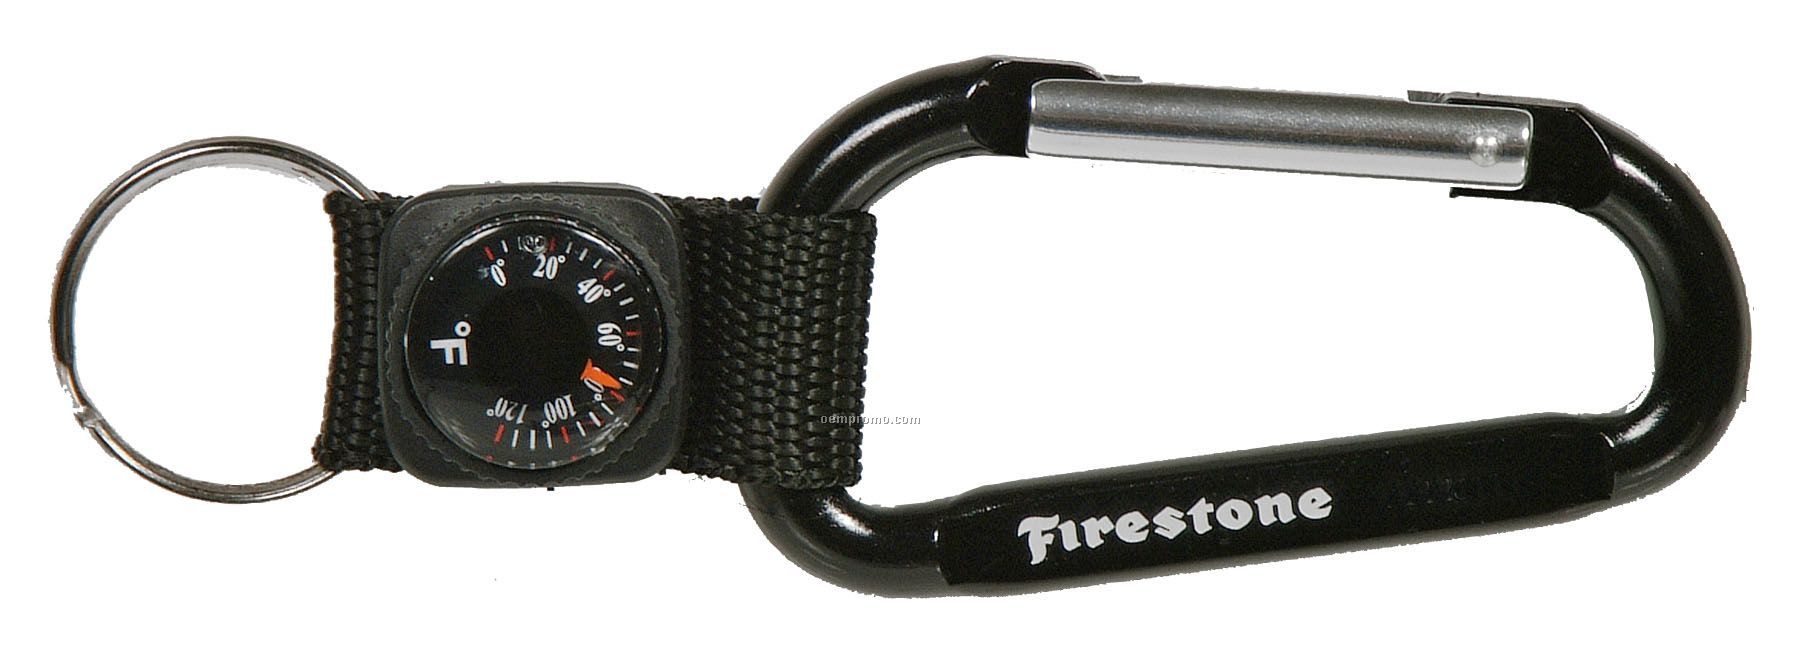 Everest Carabiner Keychain W/ Thermometer (Laser Engraved)